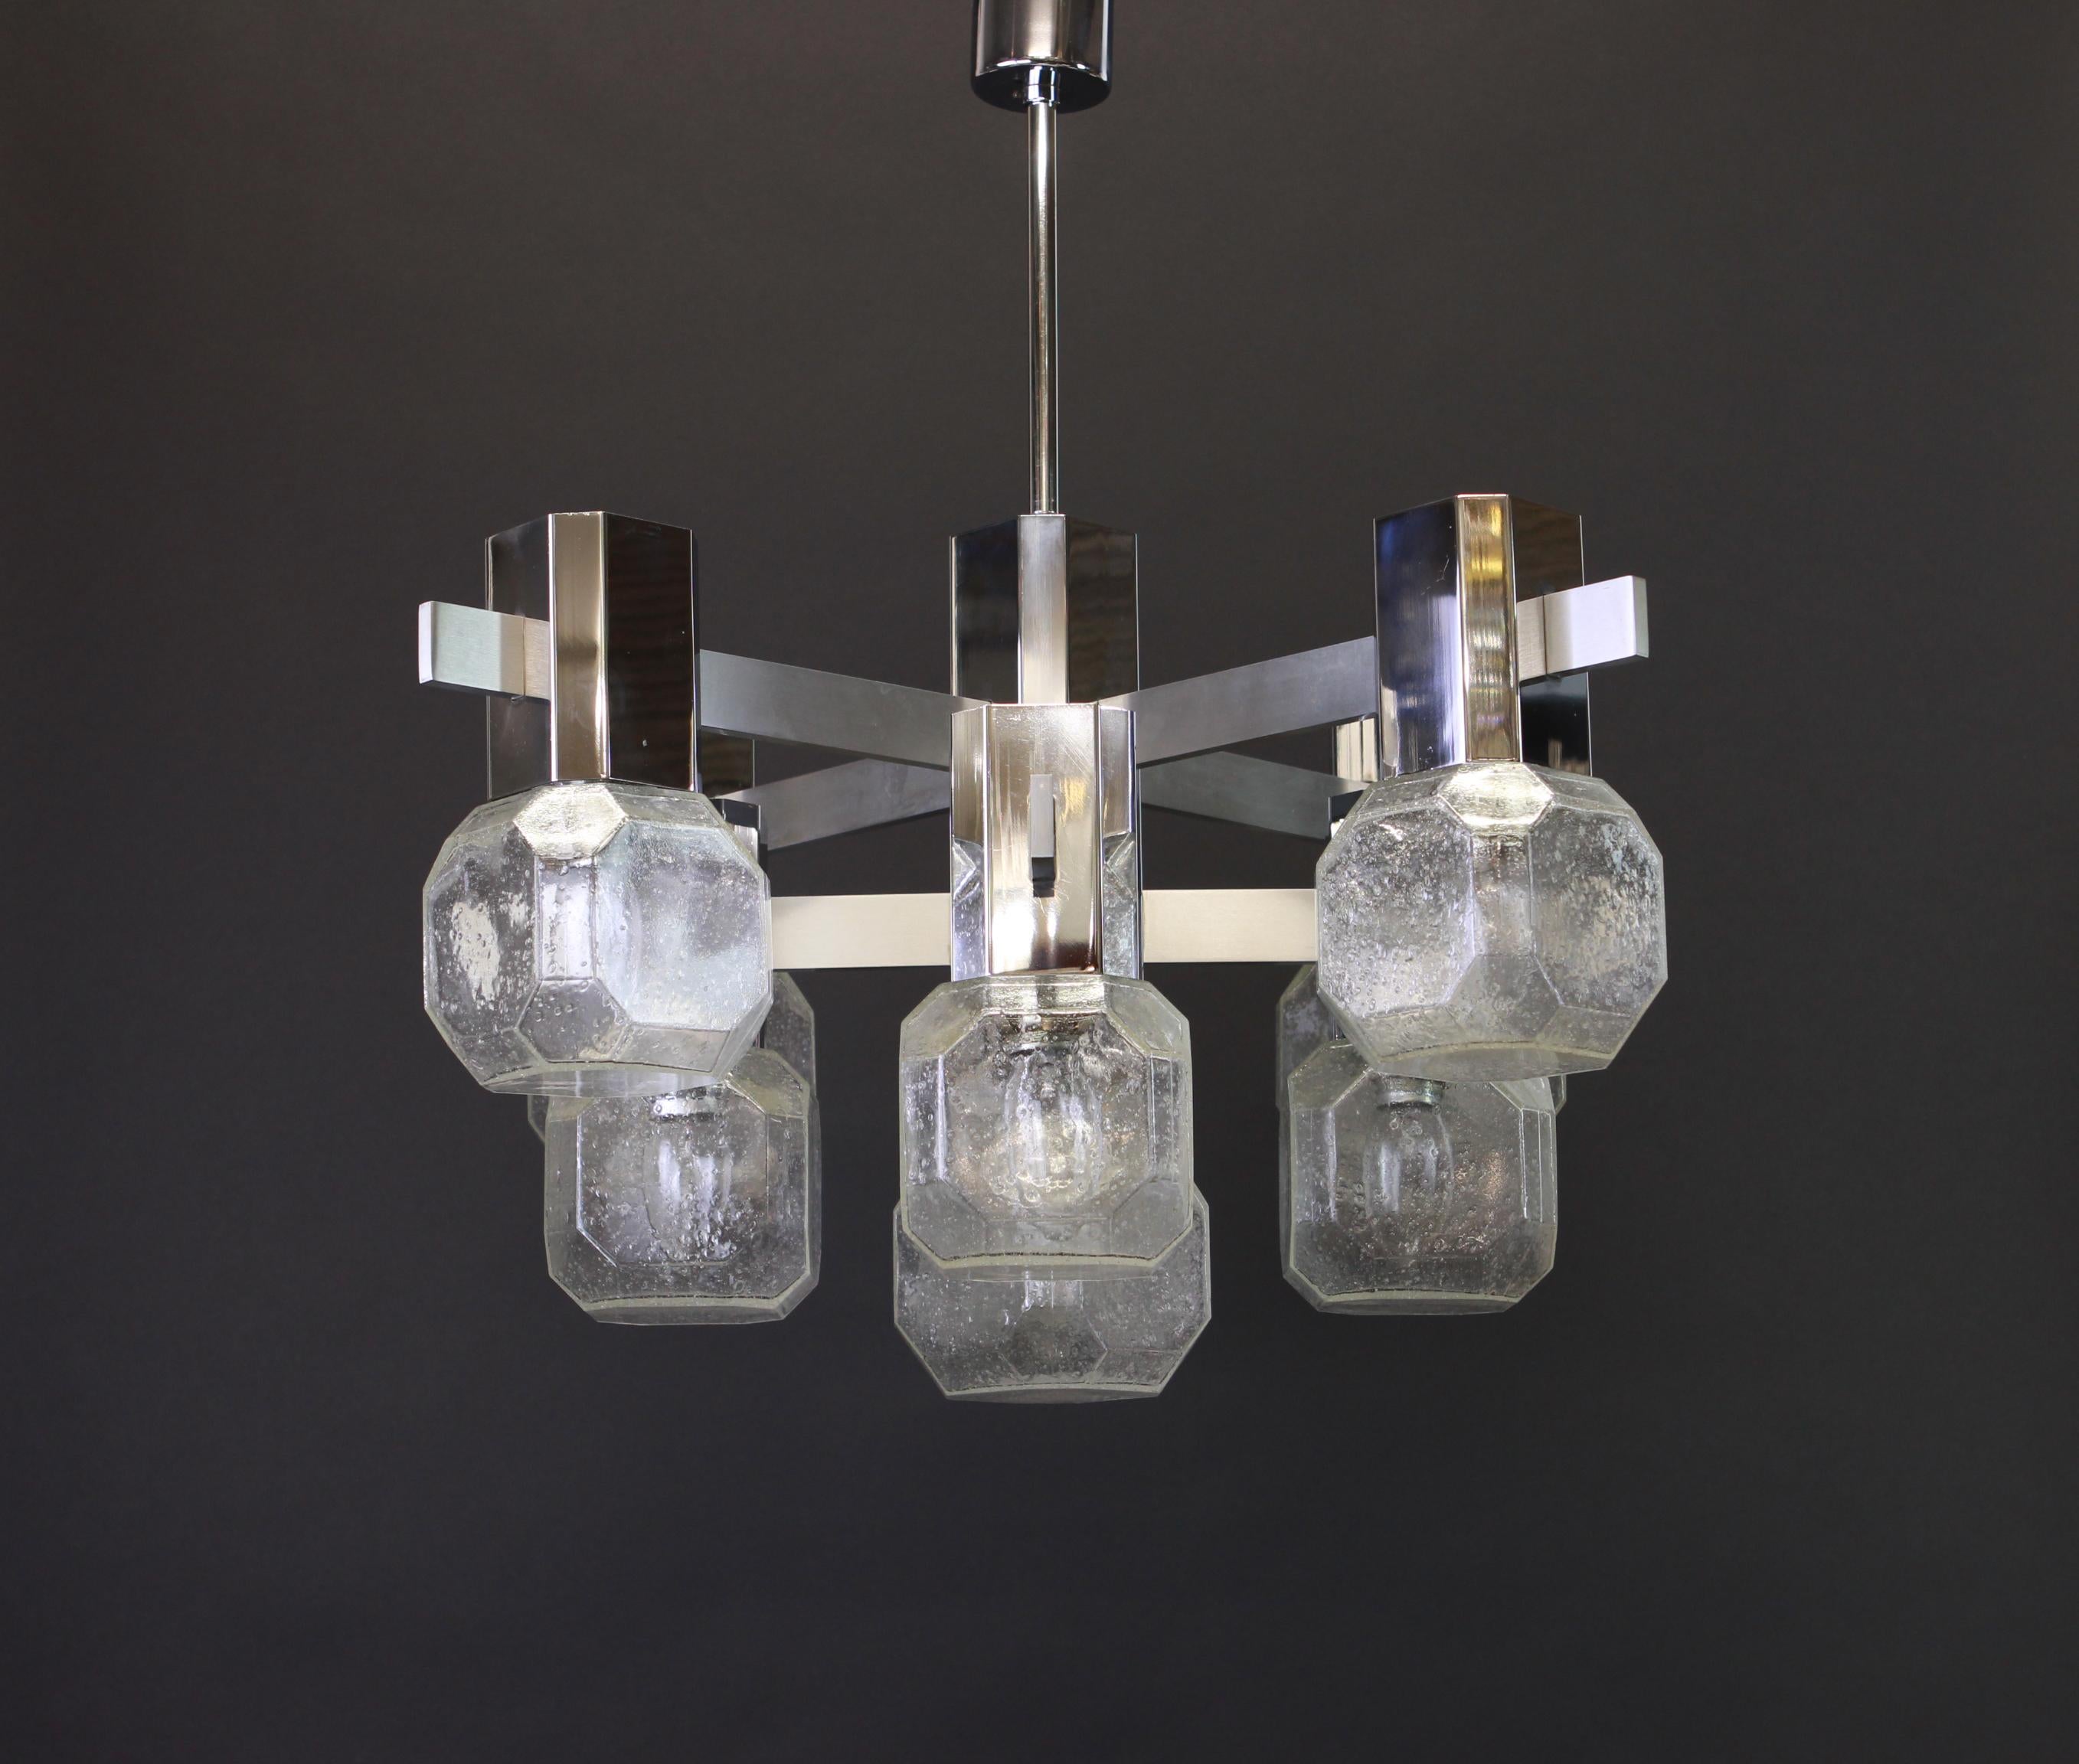 Nine-light brass chandelier in the style of Sciolari.
9 mouth-blown glasses which gives a very beautiful light effect.
The frame is made of chrome metal and aluminum.

High quality and in very good condition. Cleaned, well-wired and ready to